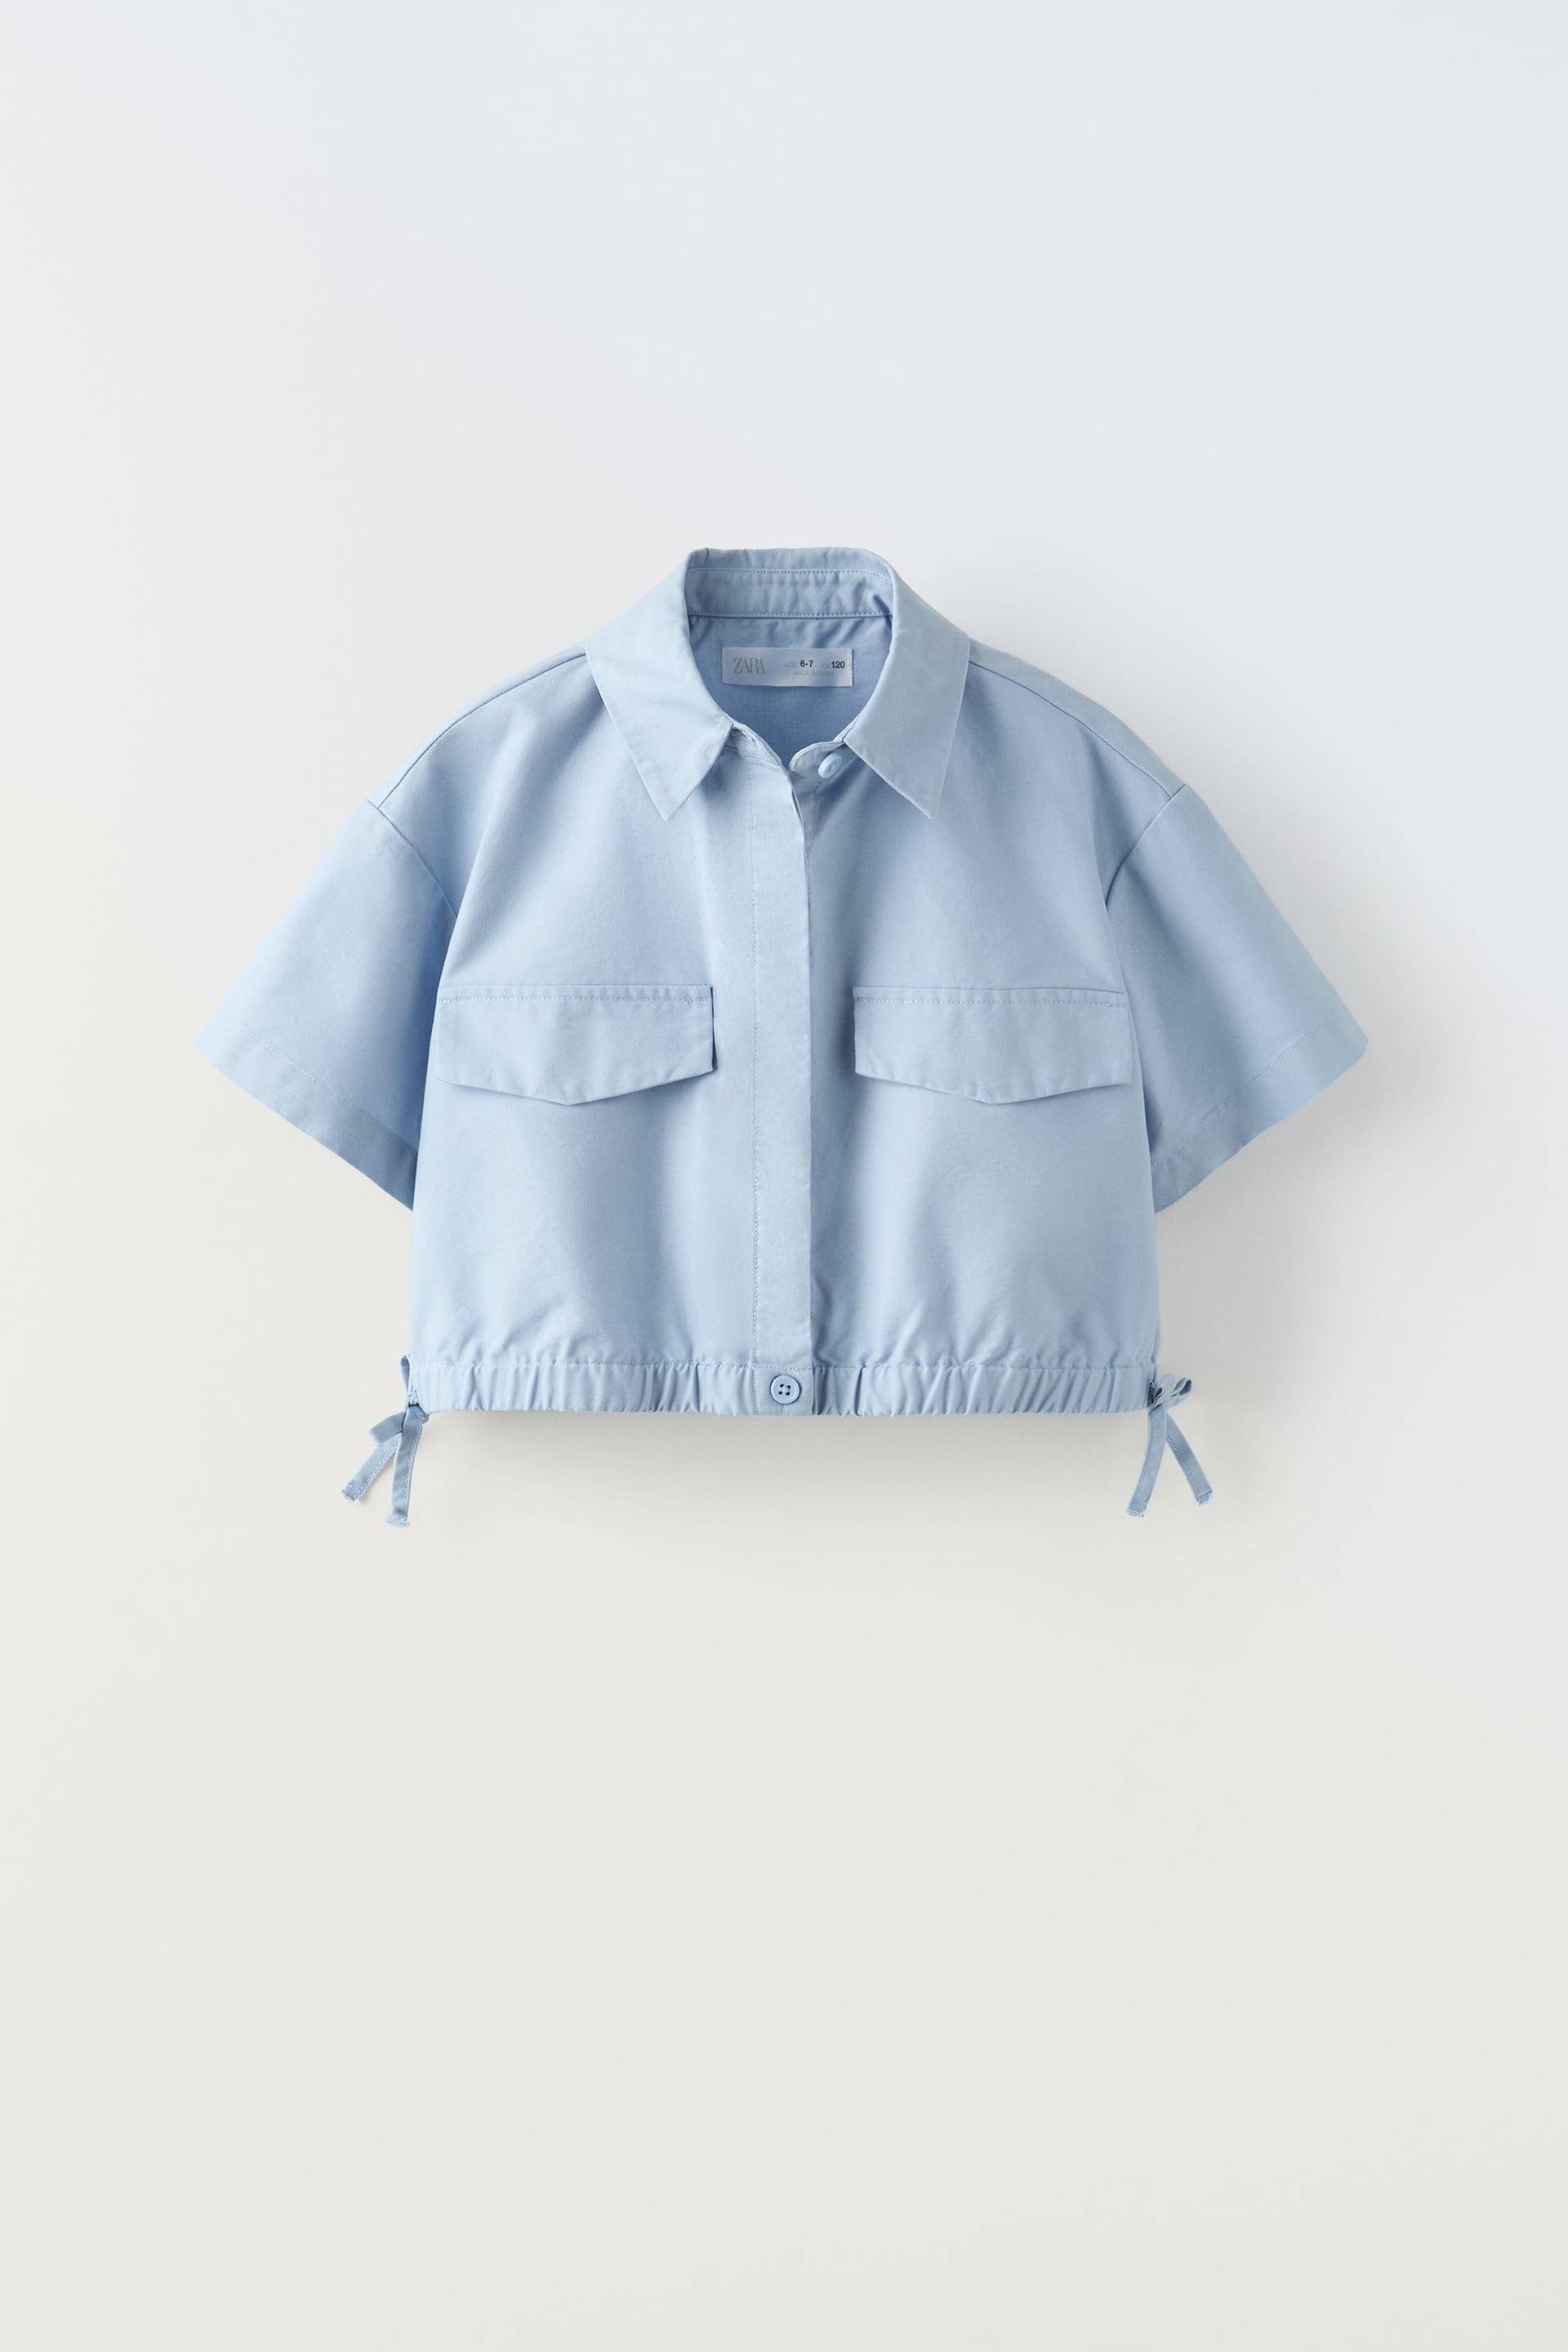 TECHNICAL SHIRT WITH BOWS by ZARA